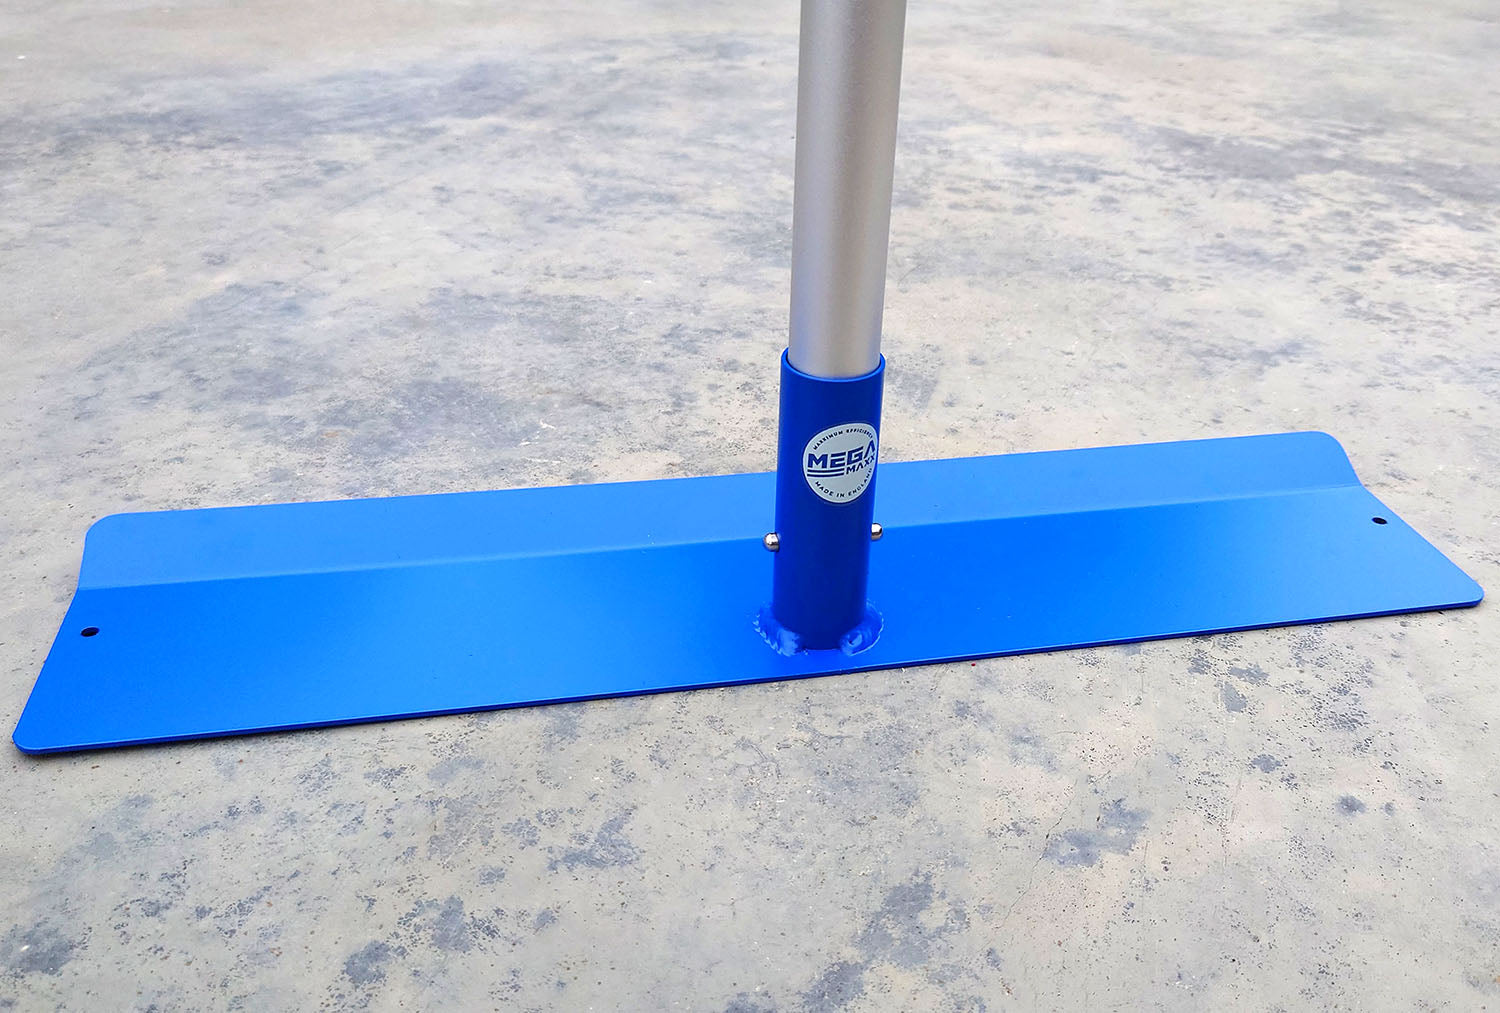 MegaMaxx UK™ Concrete Tamping & Spreading Placer Tool with Telescopic Handle - Indoor Outdoors